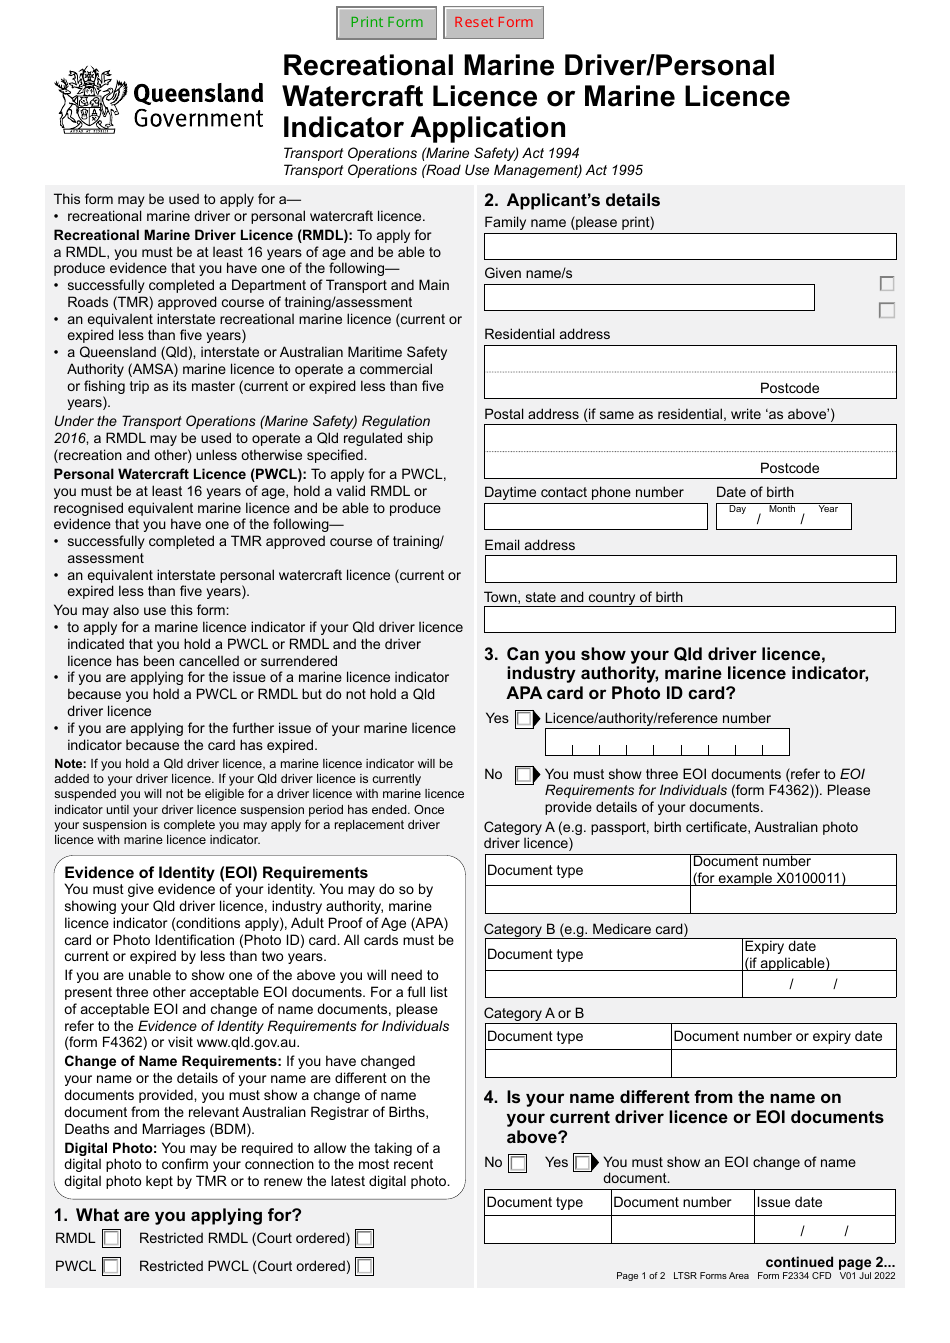 Form F2334 Recreational Marine Driver / Personal Watercraft Licence or Marine Licence Indicator Application - Queensland, Australia, Page 1